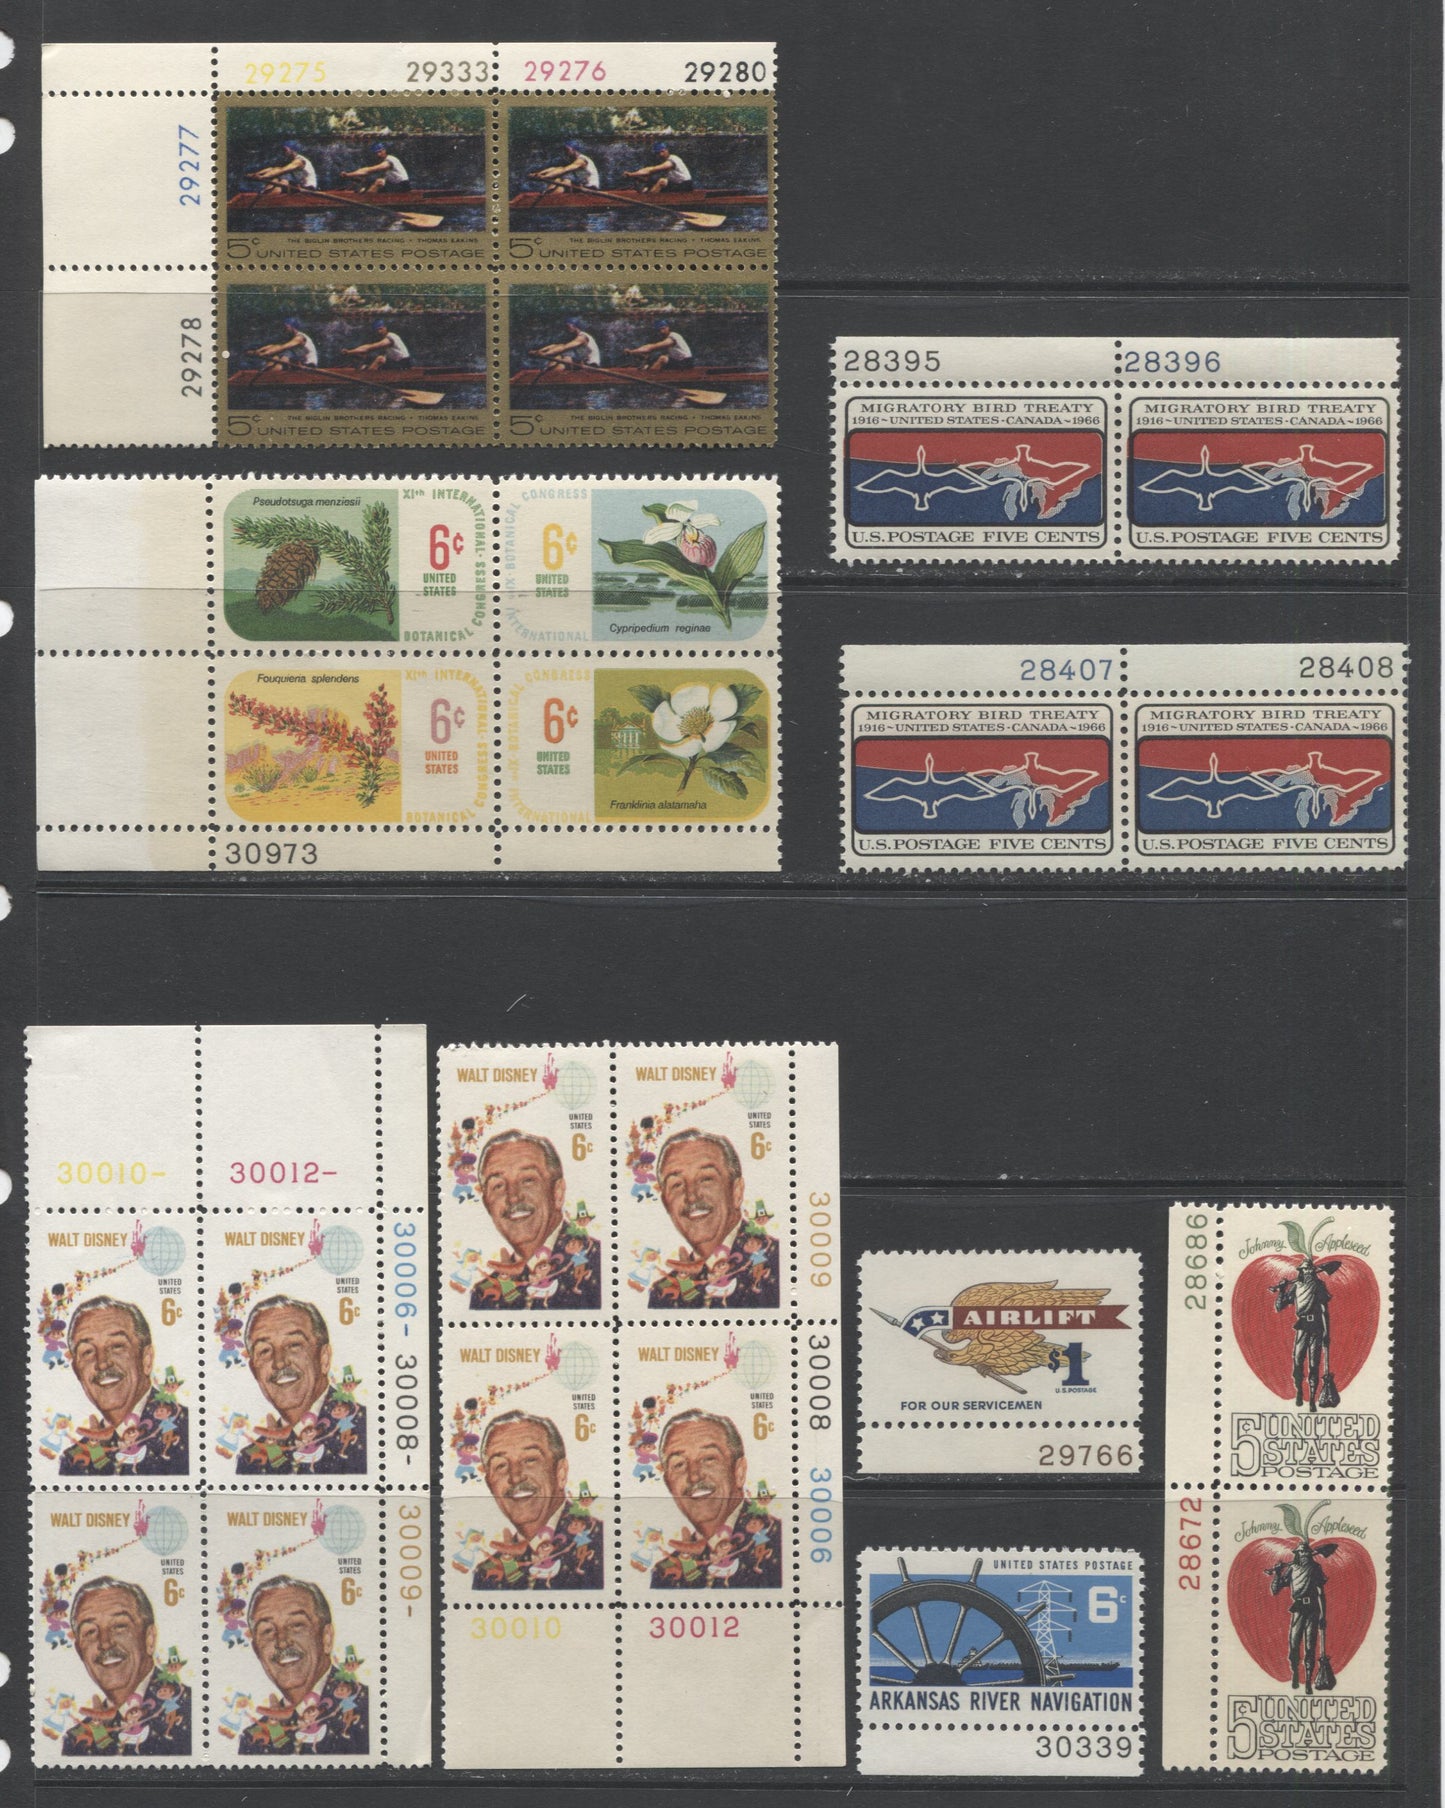 Lot 143 United States SC#1306/1386 1966-1969 Commemorative Issues, 54 VF/XFNH Plate Number Singles, Pairs & Blocks. 2017 Scott Cat. $13.50 USD, Click on Listing to See ALL Pictures